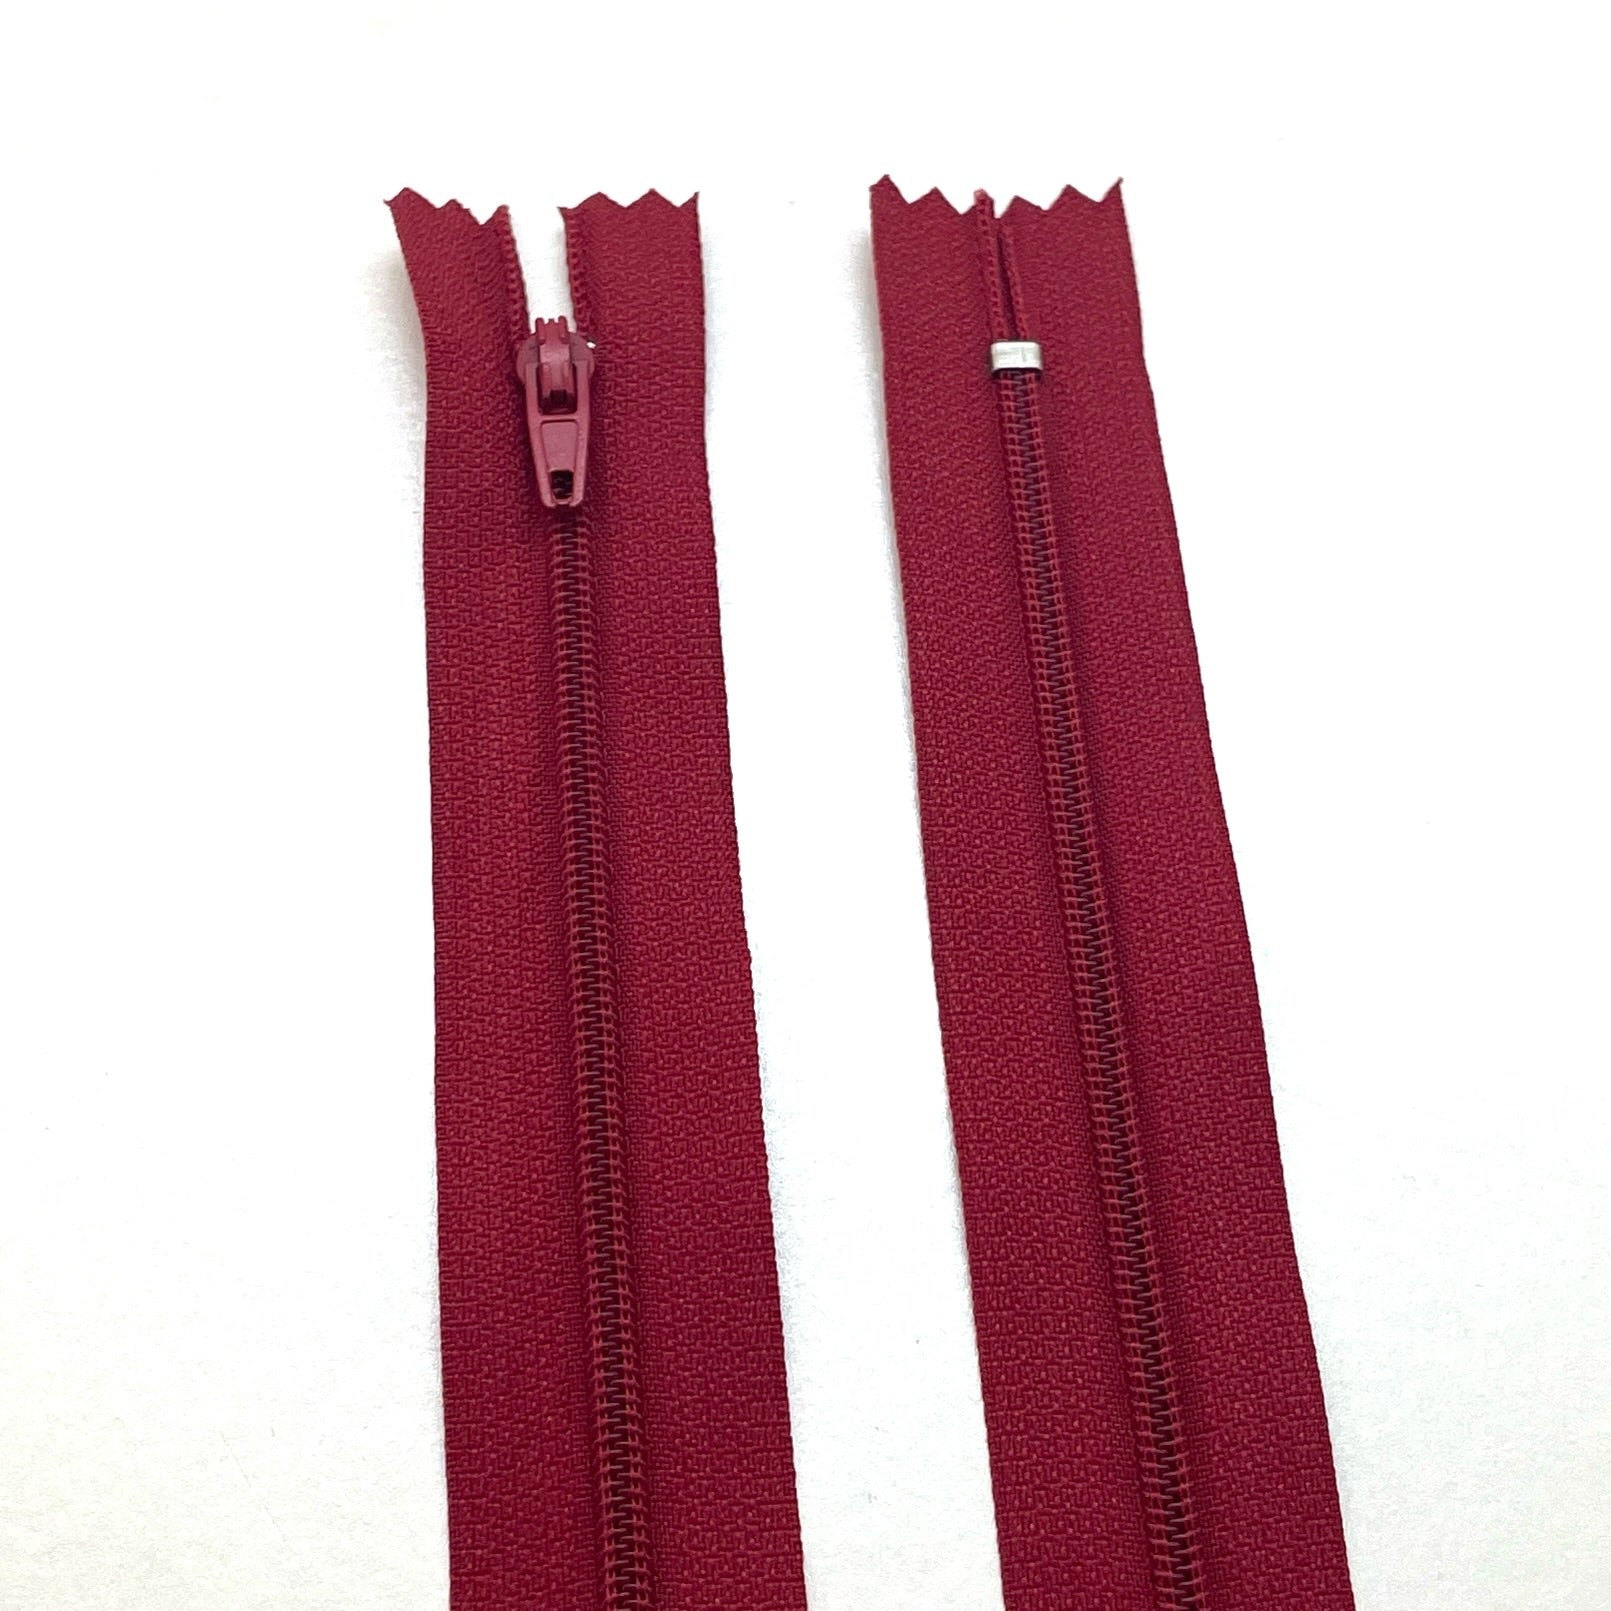 Photo of red burgundy nylon zips available in 25 colors and 5 sizes. Excellent quality zippers for craft and dressmaking purposes. Perfect for dresses, skirts, trousers, bags, purses, cushions, and numerous other projects. So many possibilities, so little time!